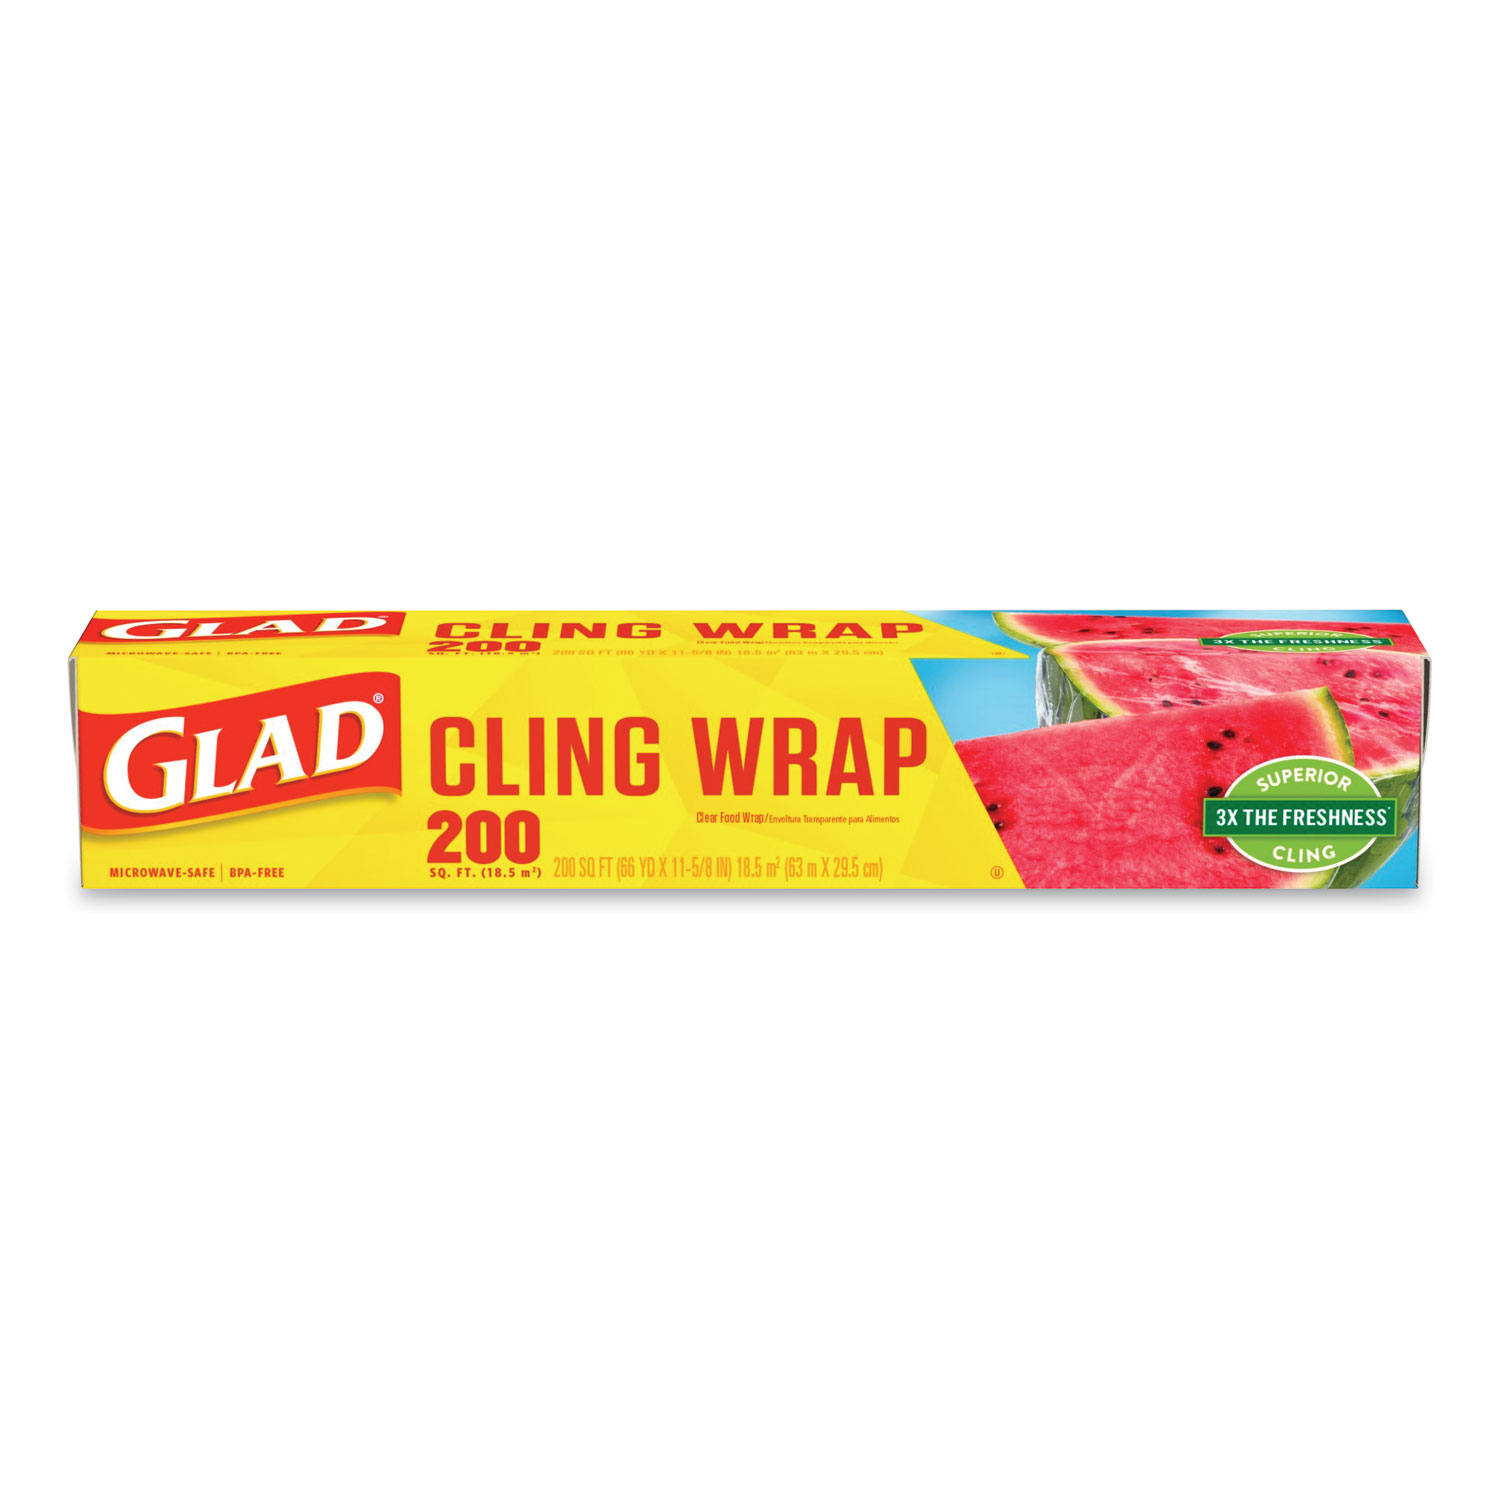 Buy Glad Cling Wrap Clear Plastic 200 sq ft - 3 Pieces